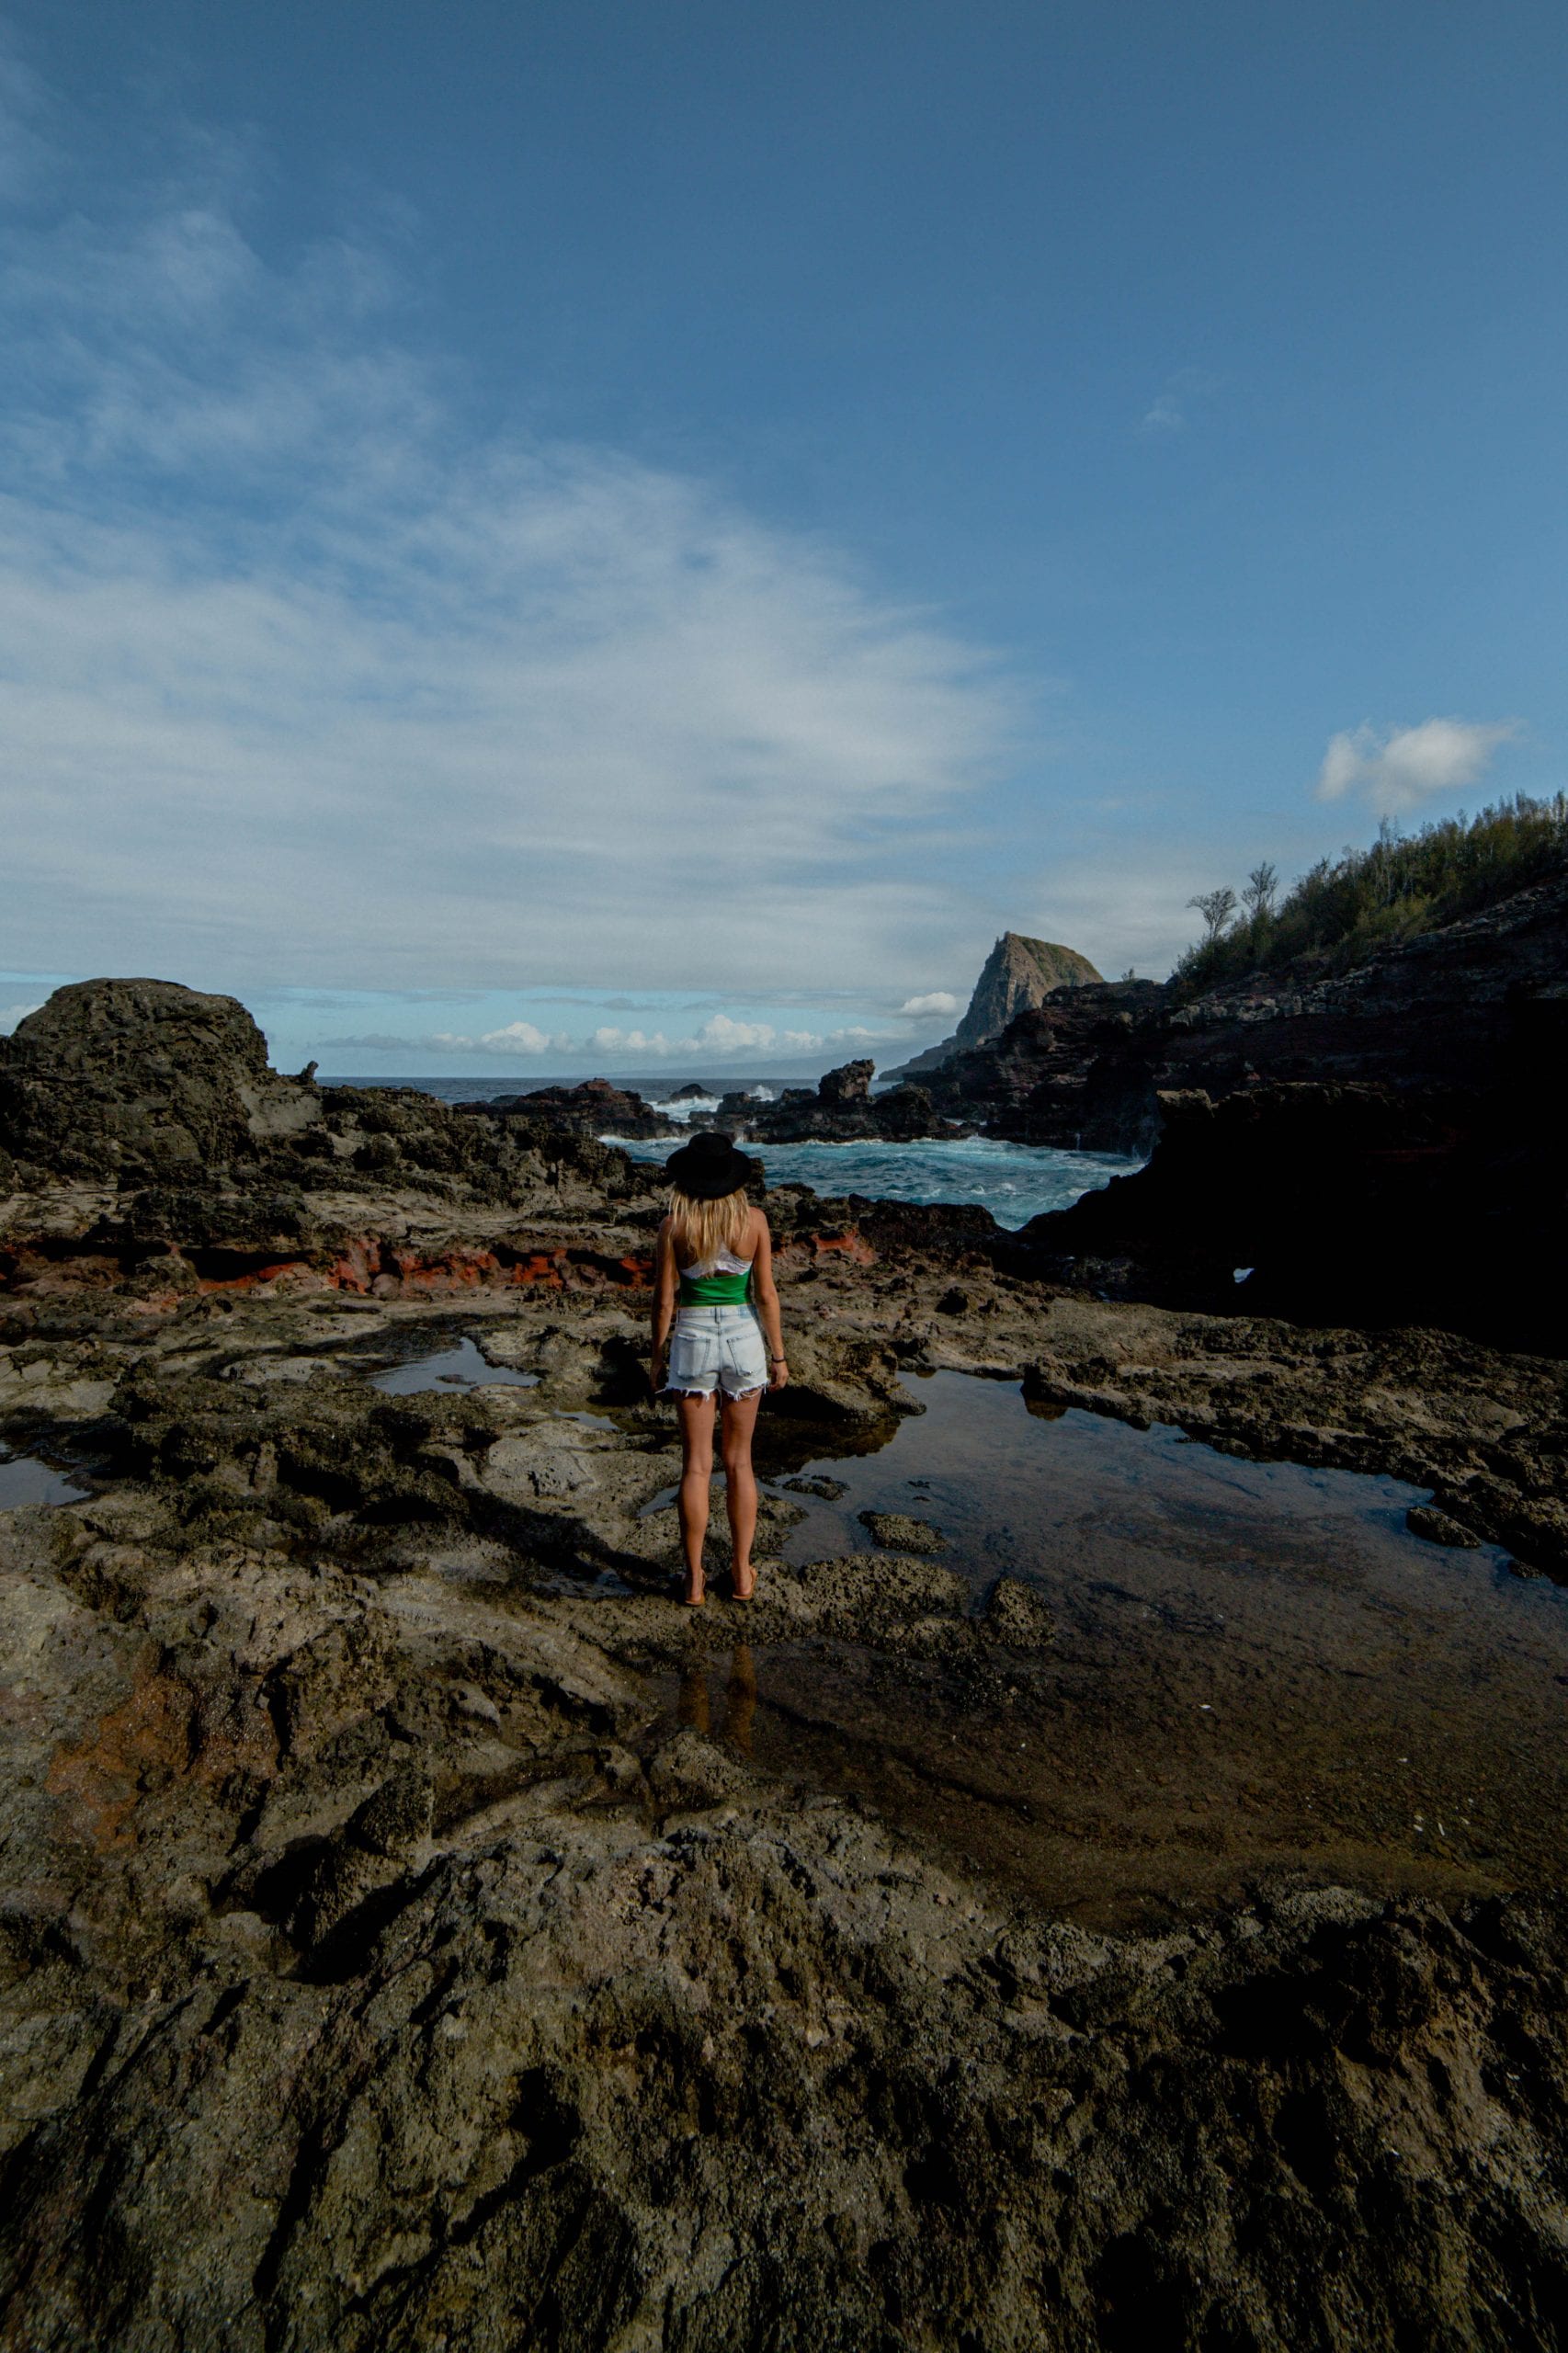 One of the best stops on West Maui at the Olivine pools